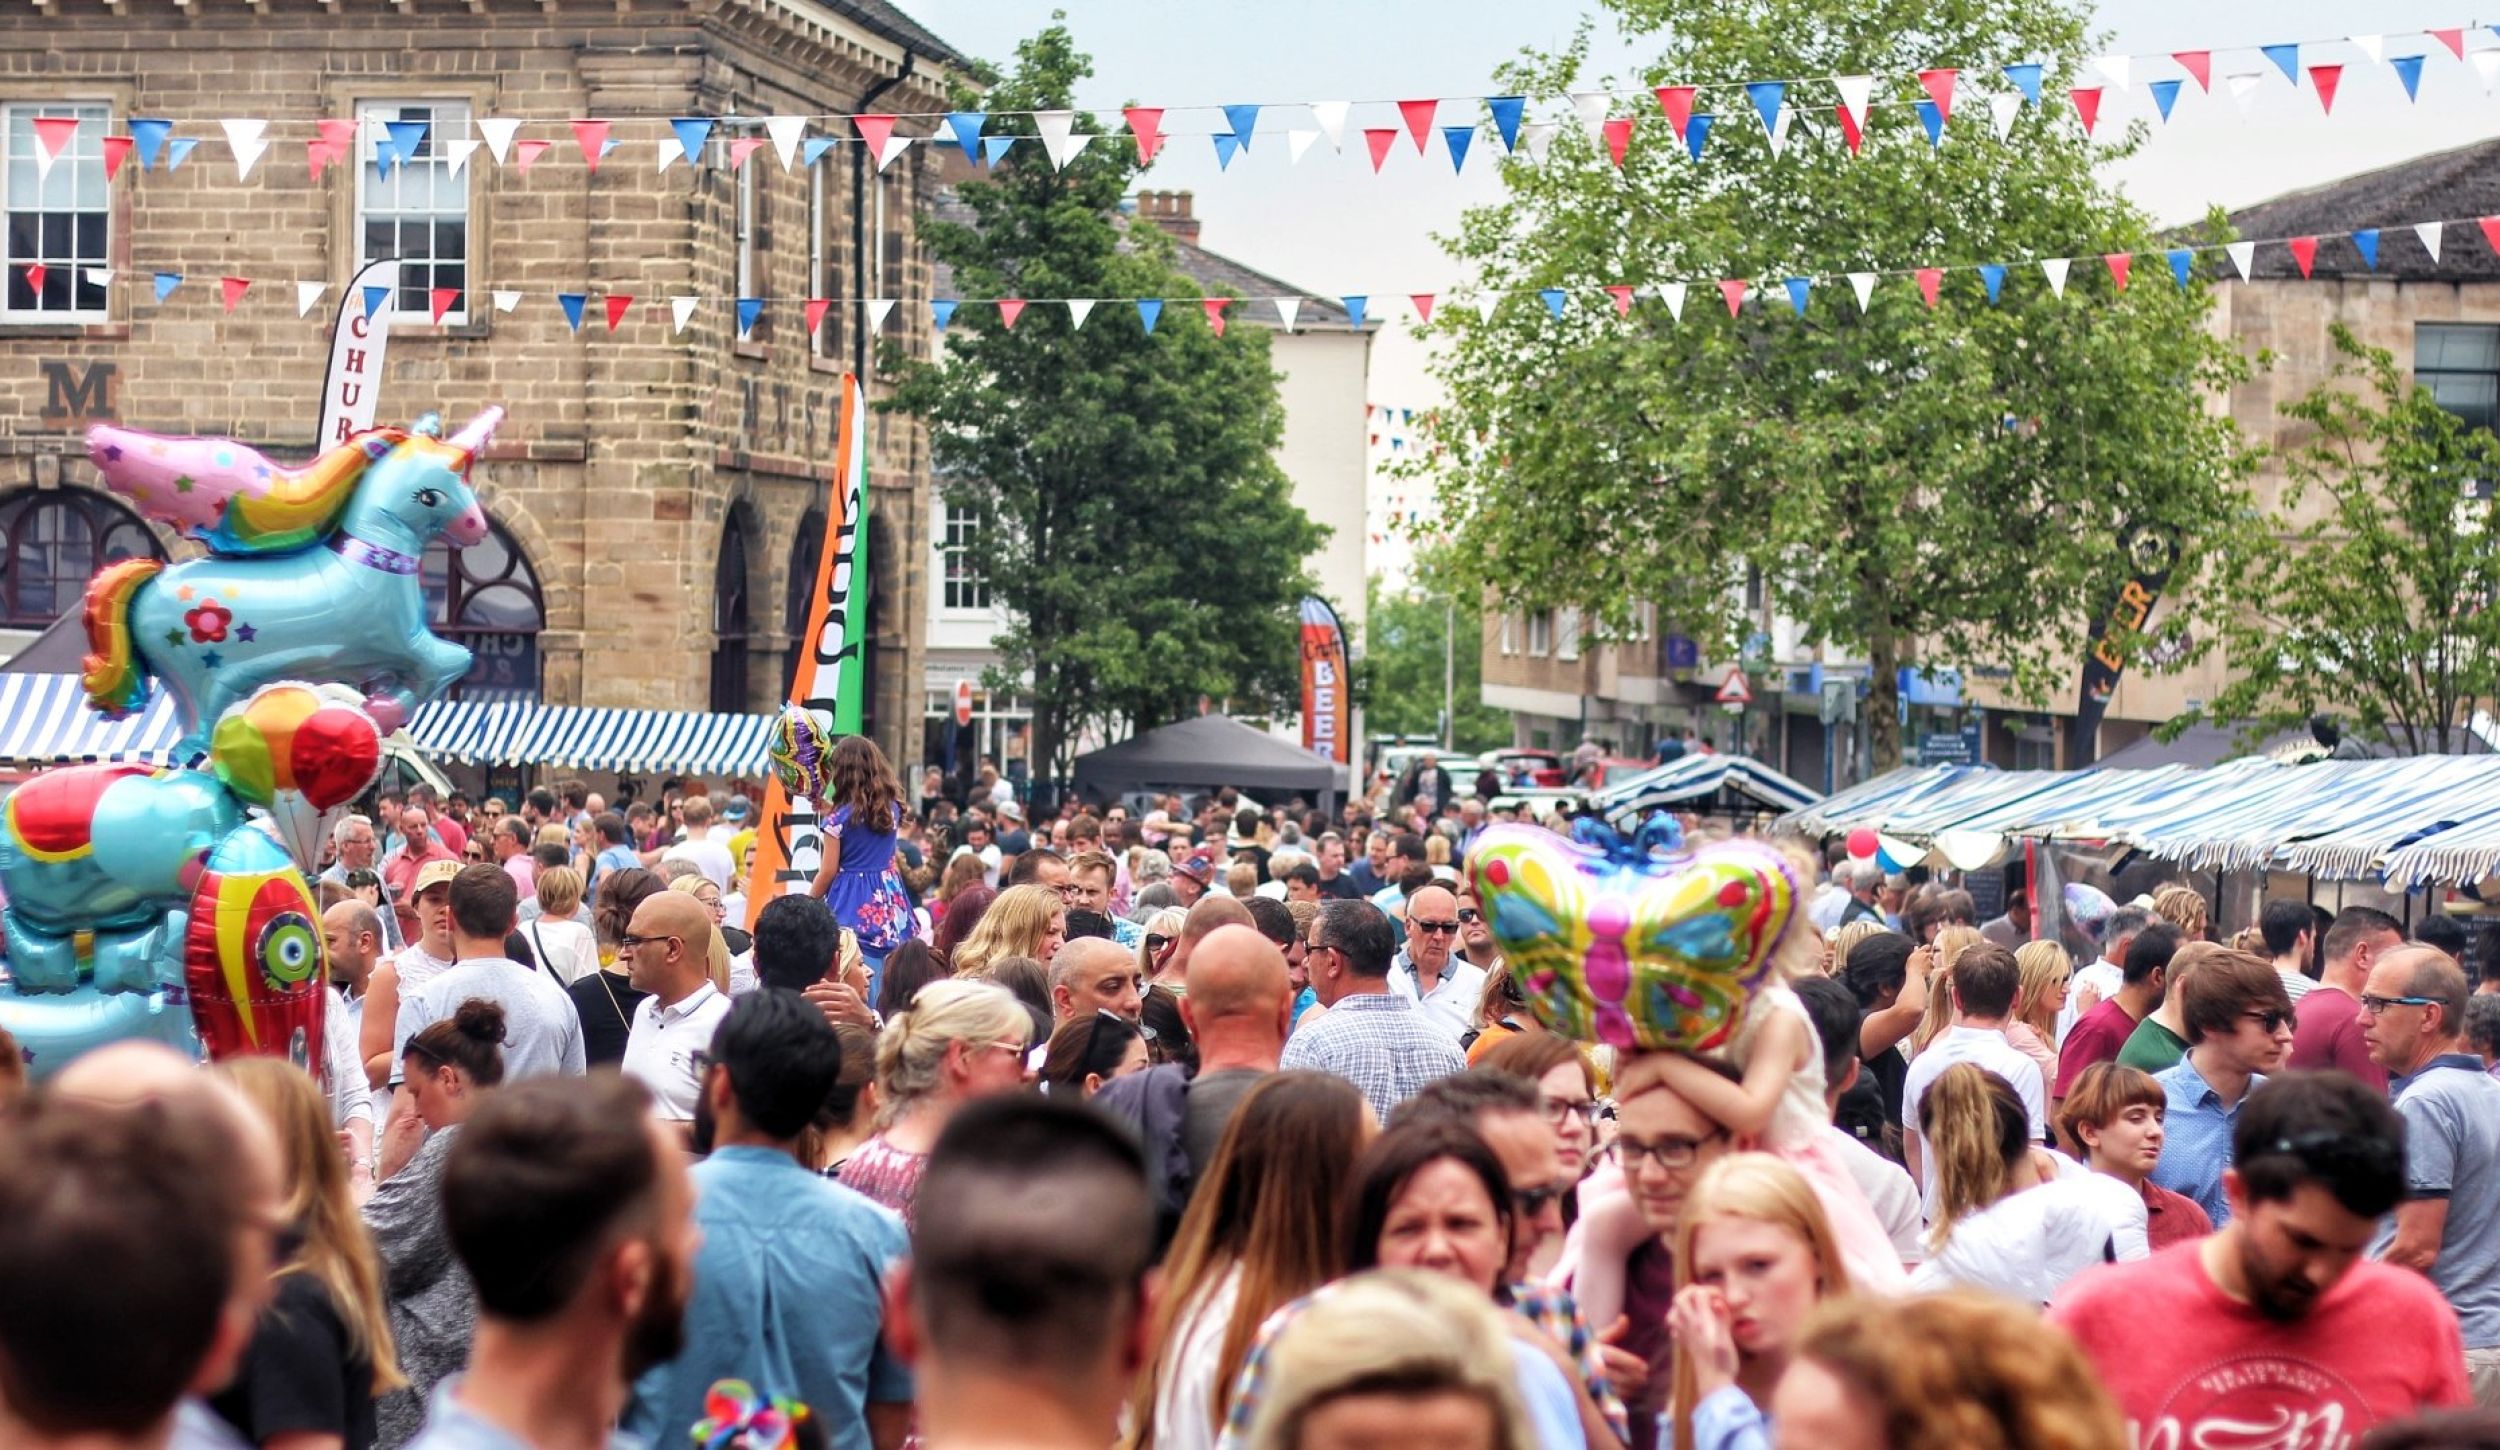 Thousands expected to flock to Warwick Food Festival CJs Events